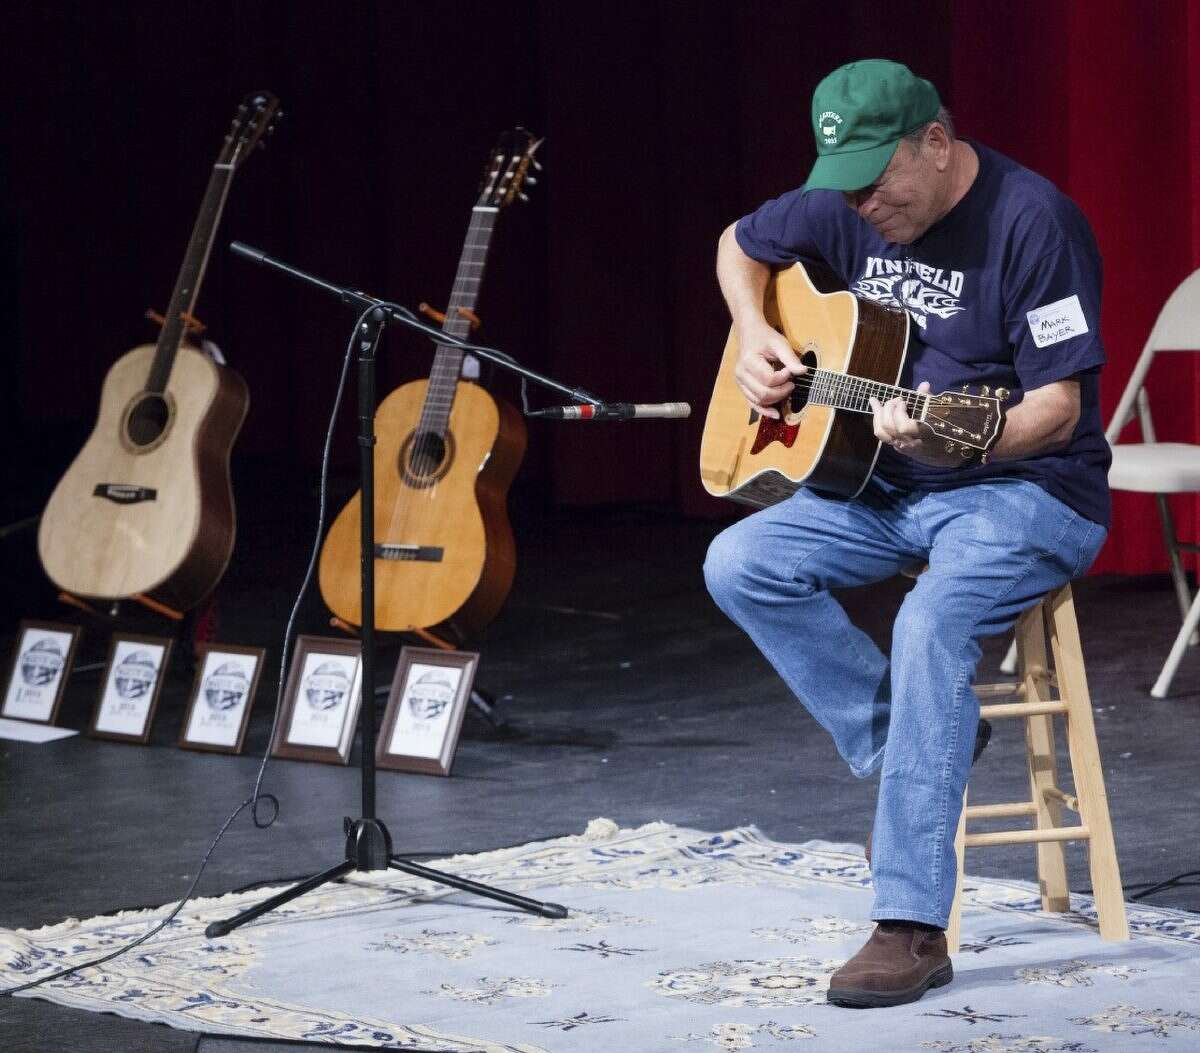 A participant in last year's Indiana State Fingerstyle Guitar Festival.